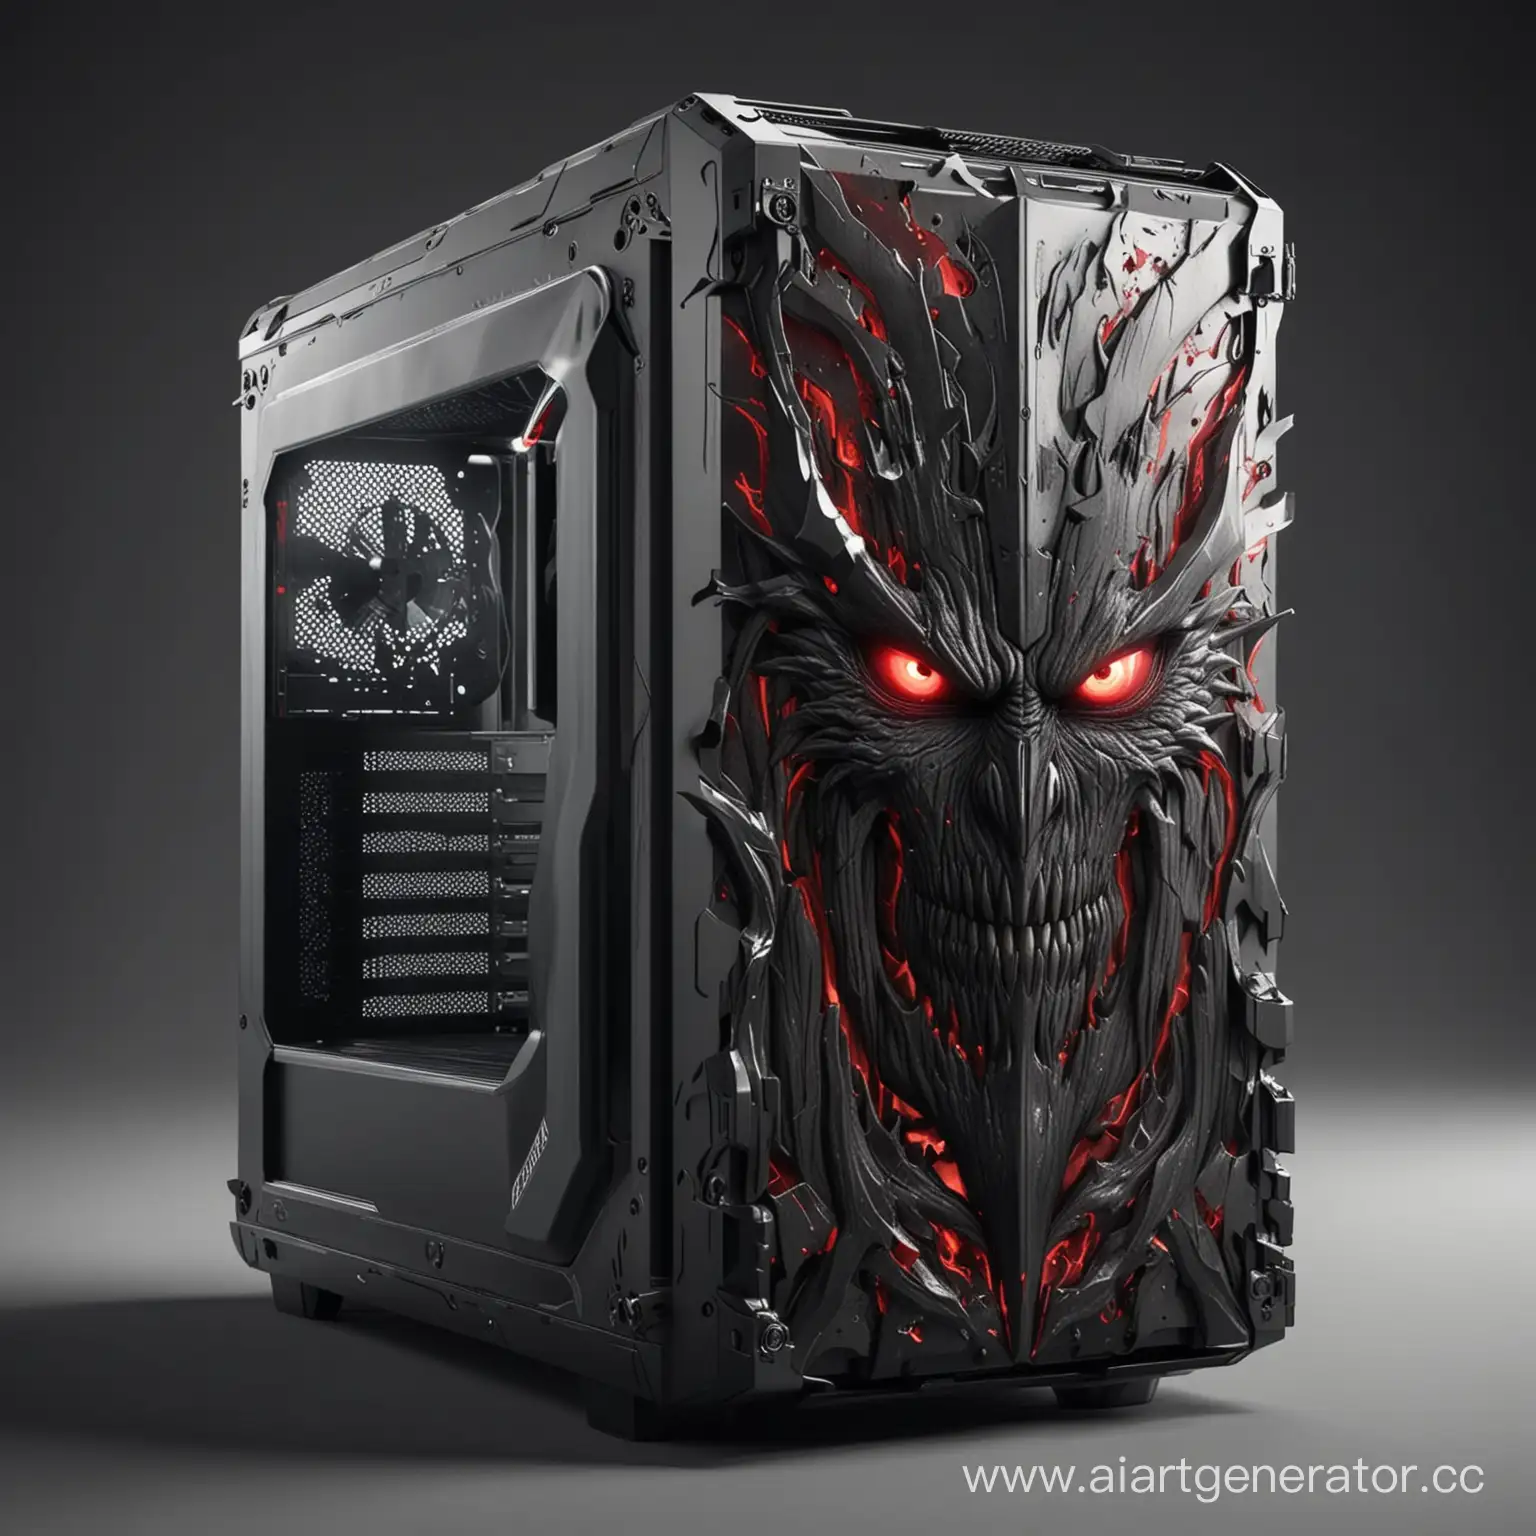 Realistic-3D-Gaming-Computer-Case-Inspired-by-Berserk-Anime